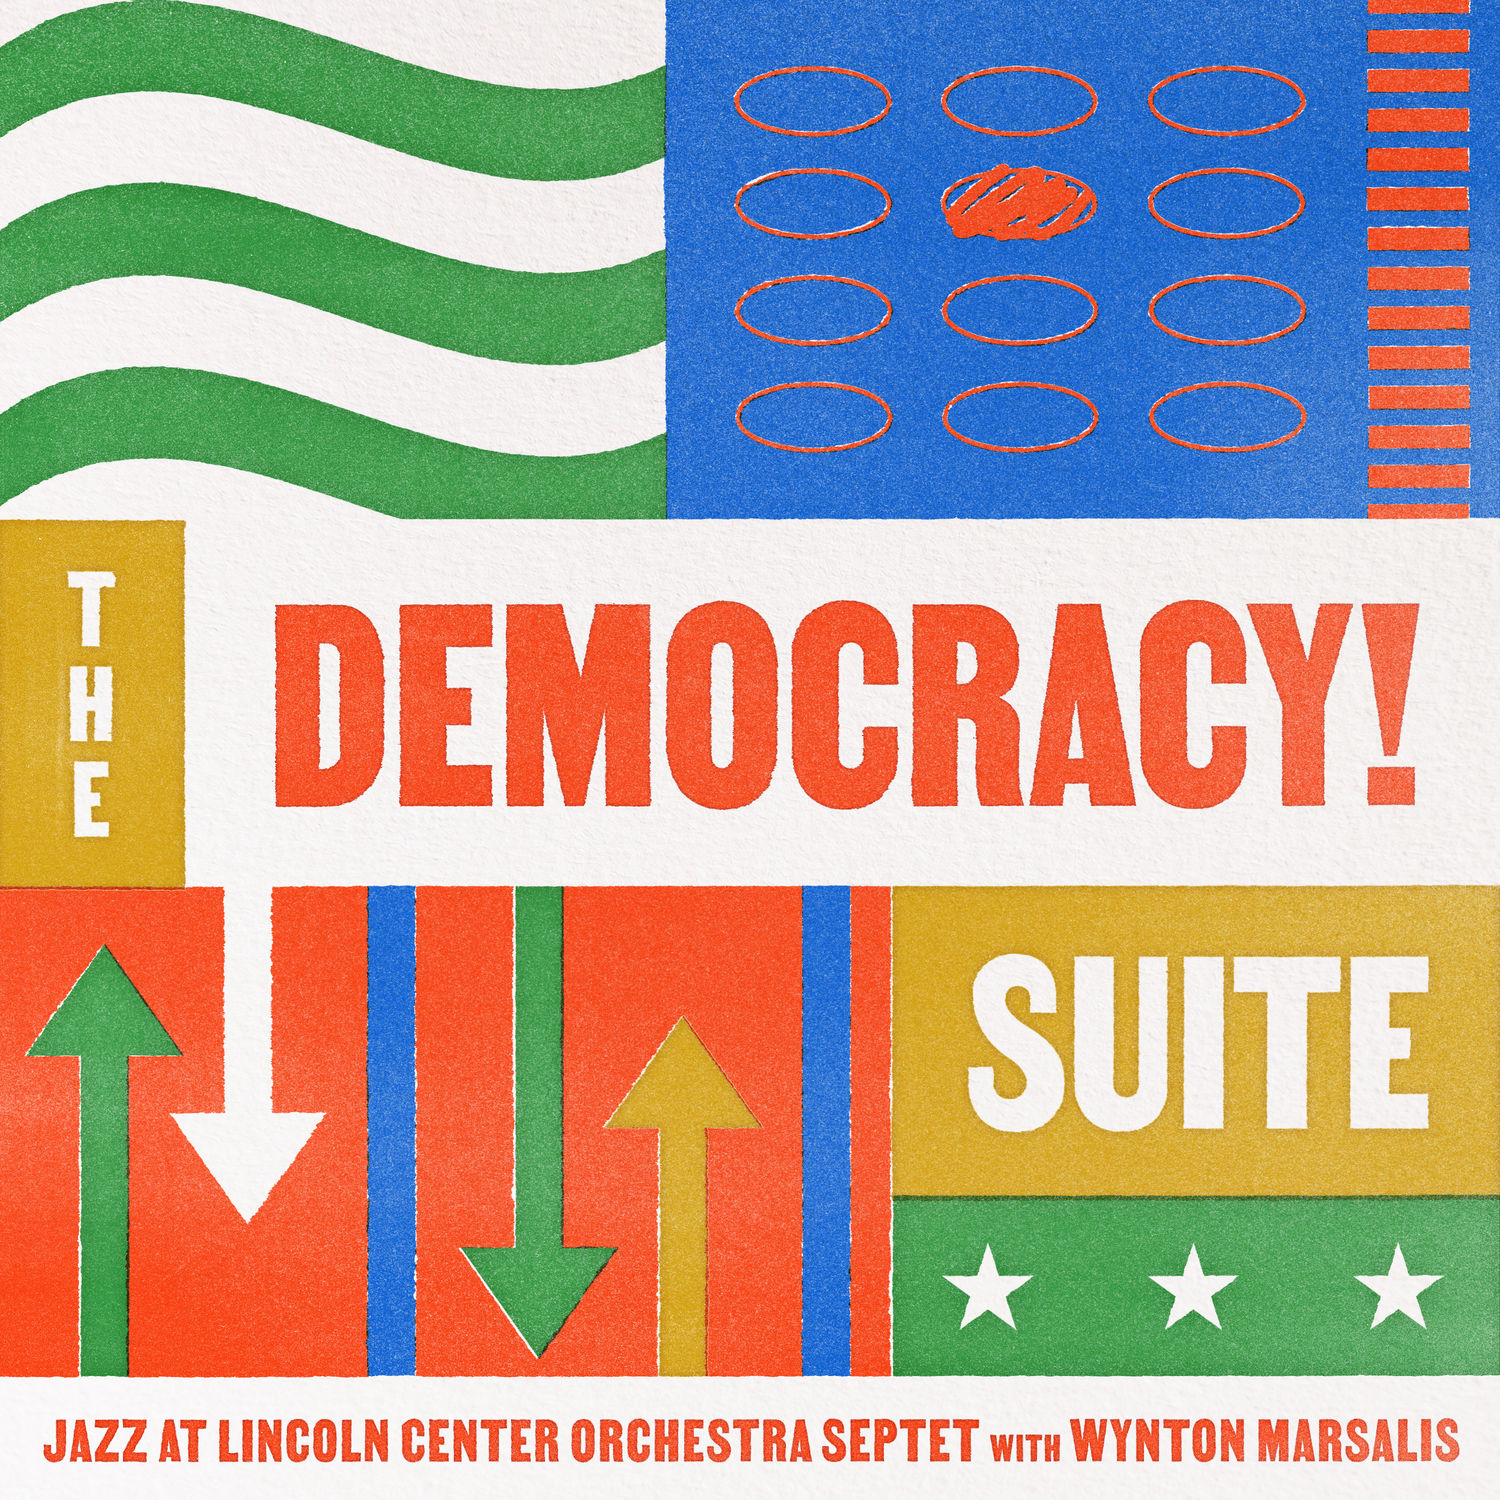 Jazz at Lincoln Center Orchestra Septet with Wynton Marsalis - The Democracy! Suite (2021) [FLAC 24bit/96kHz]